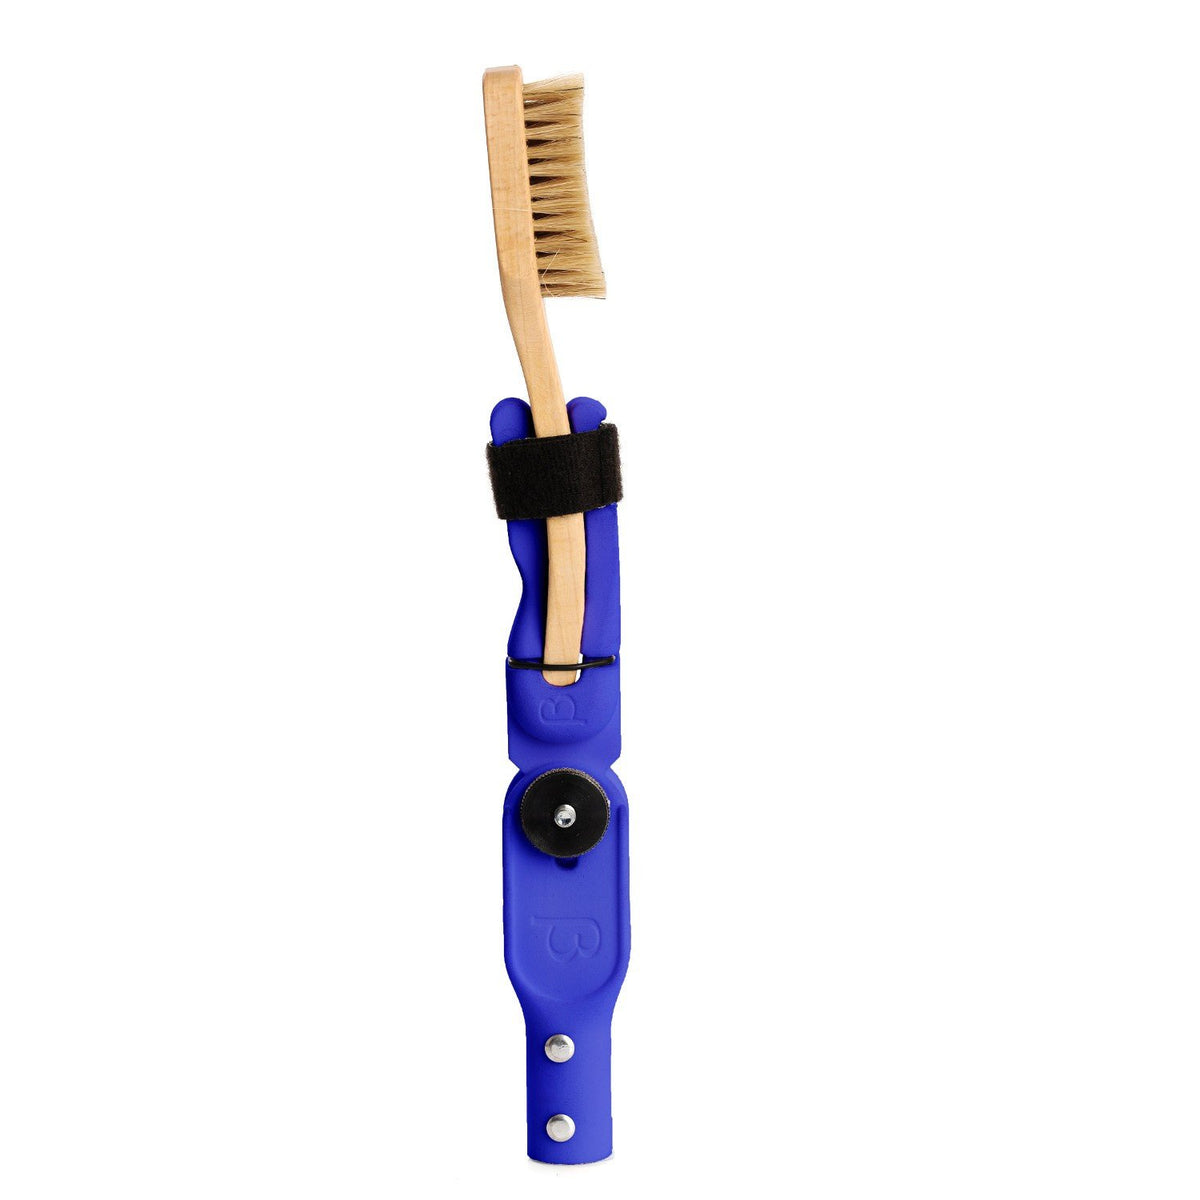 Beta Project bouldering Brush Stick, head shown fully extended with brush